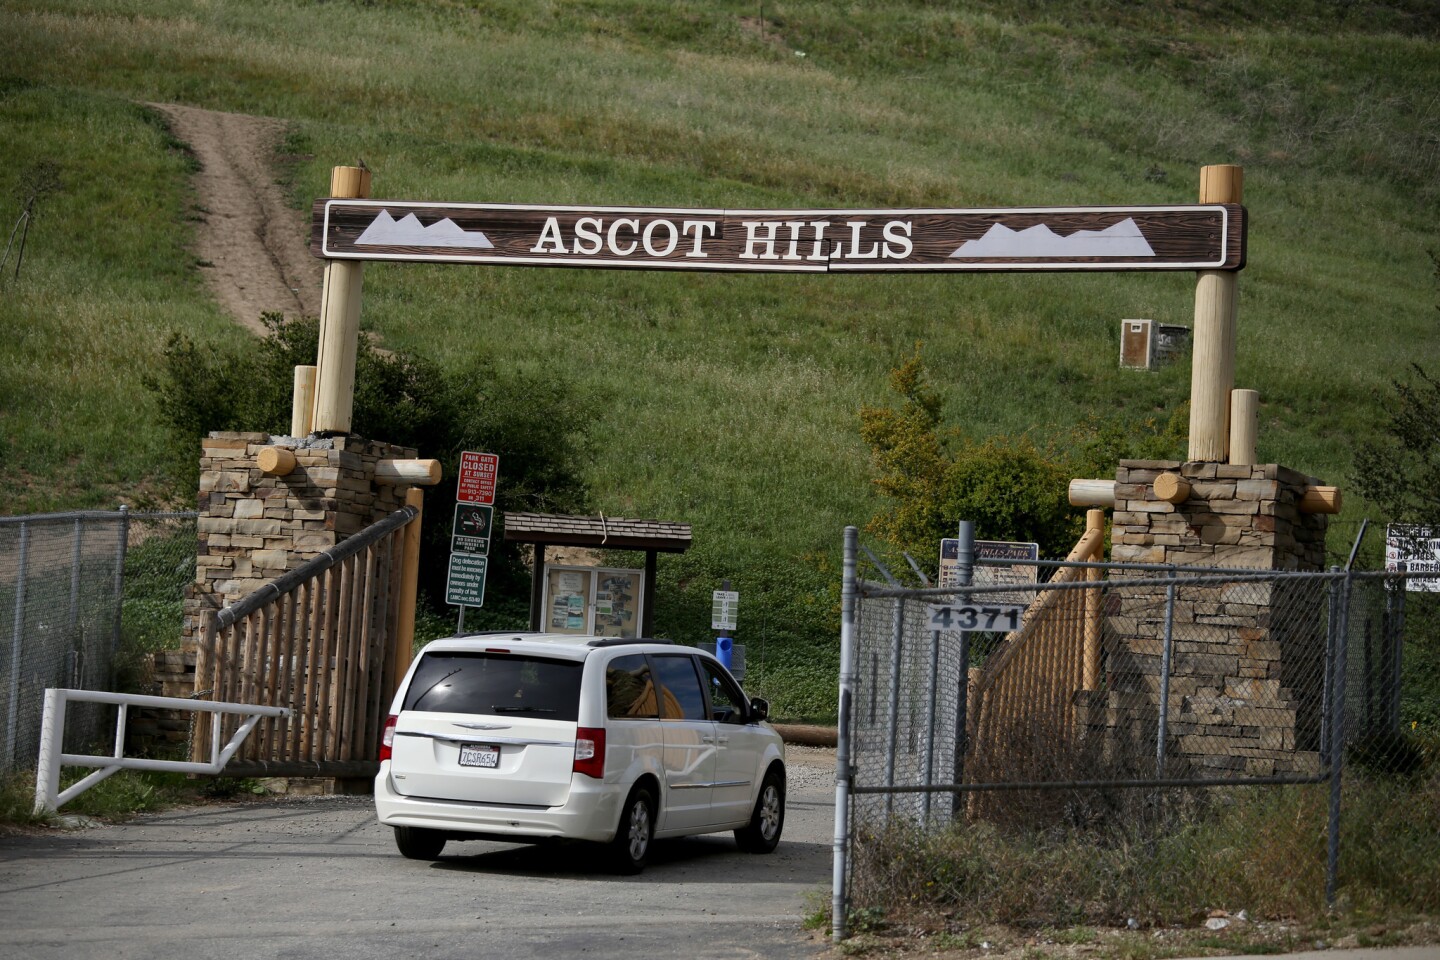 The entrance to Ascot Hills in Los Angeles. The park offers a large open space with views of downtown Los Angeles, Dodger Stadium and Palos Verdes.